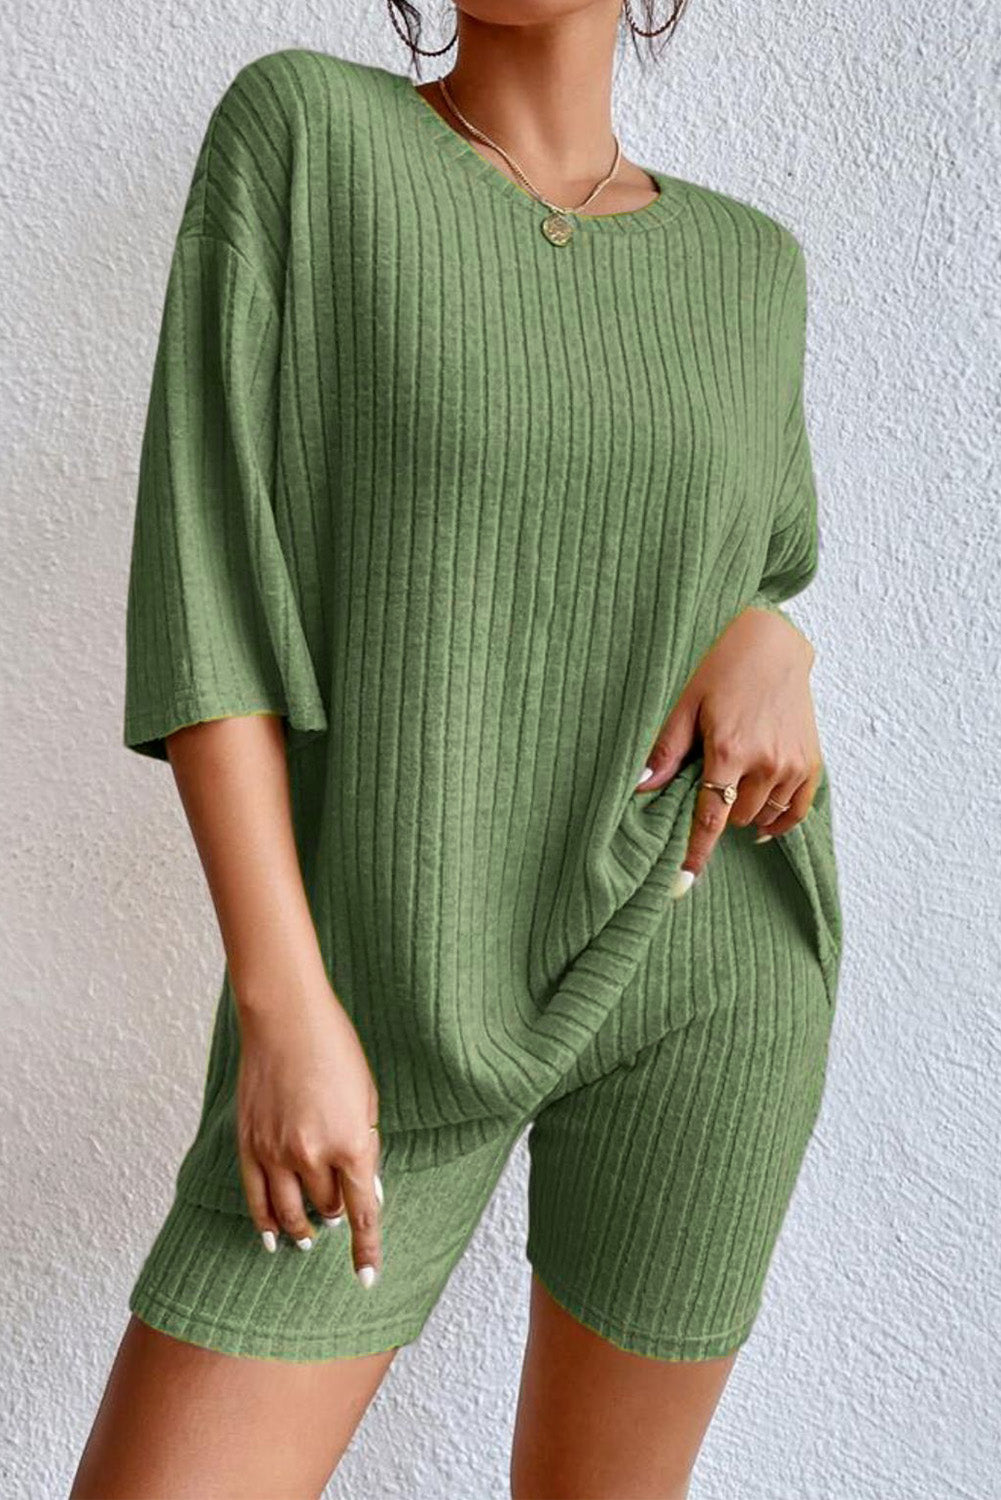 Green short set 85%Polyester+10%Viscose+5%Elastane Ribbed Knit V Neck Slouchy Two-piece Outfit - pants or short set various colors - women's pants set at TFC&H Co.